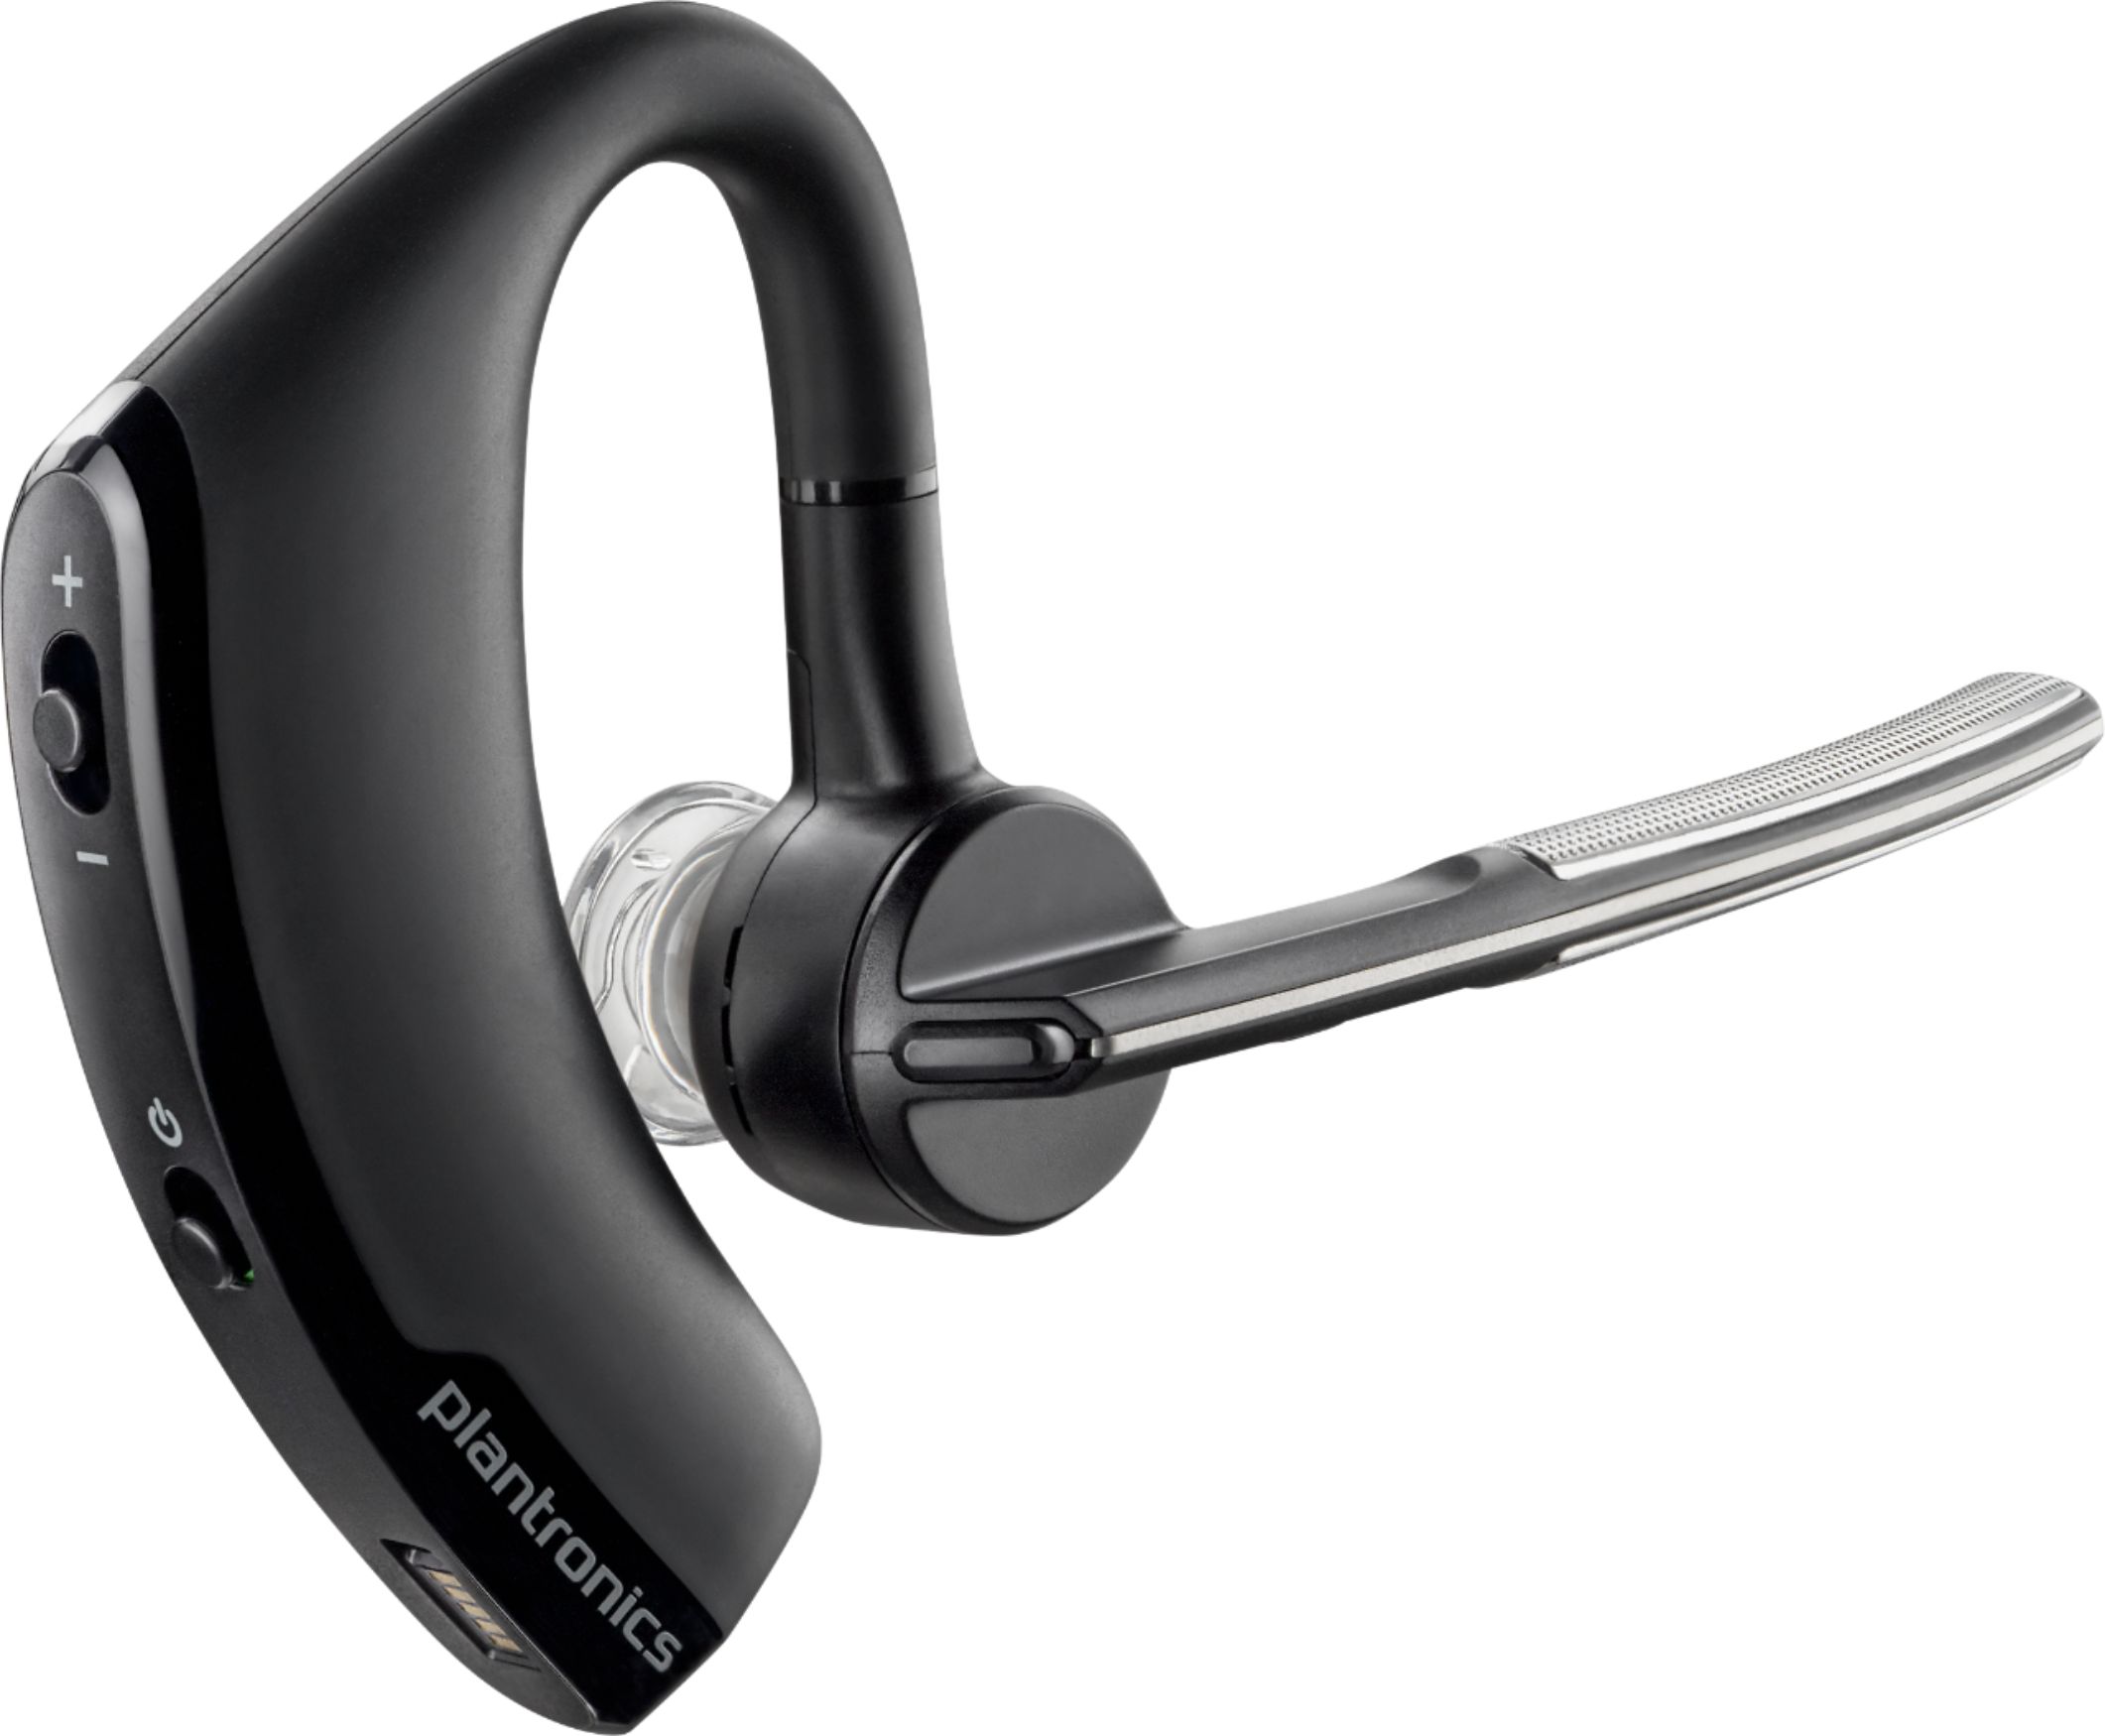 Angle View: Poly - formerly Plantronics - Voyager Legend Wireless Noise Cancelling Bluetooth Headset - Silver/Black